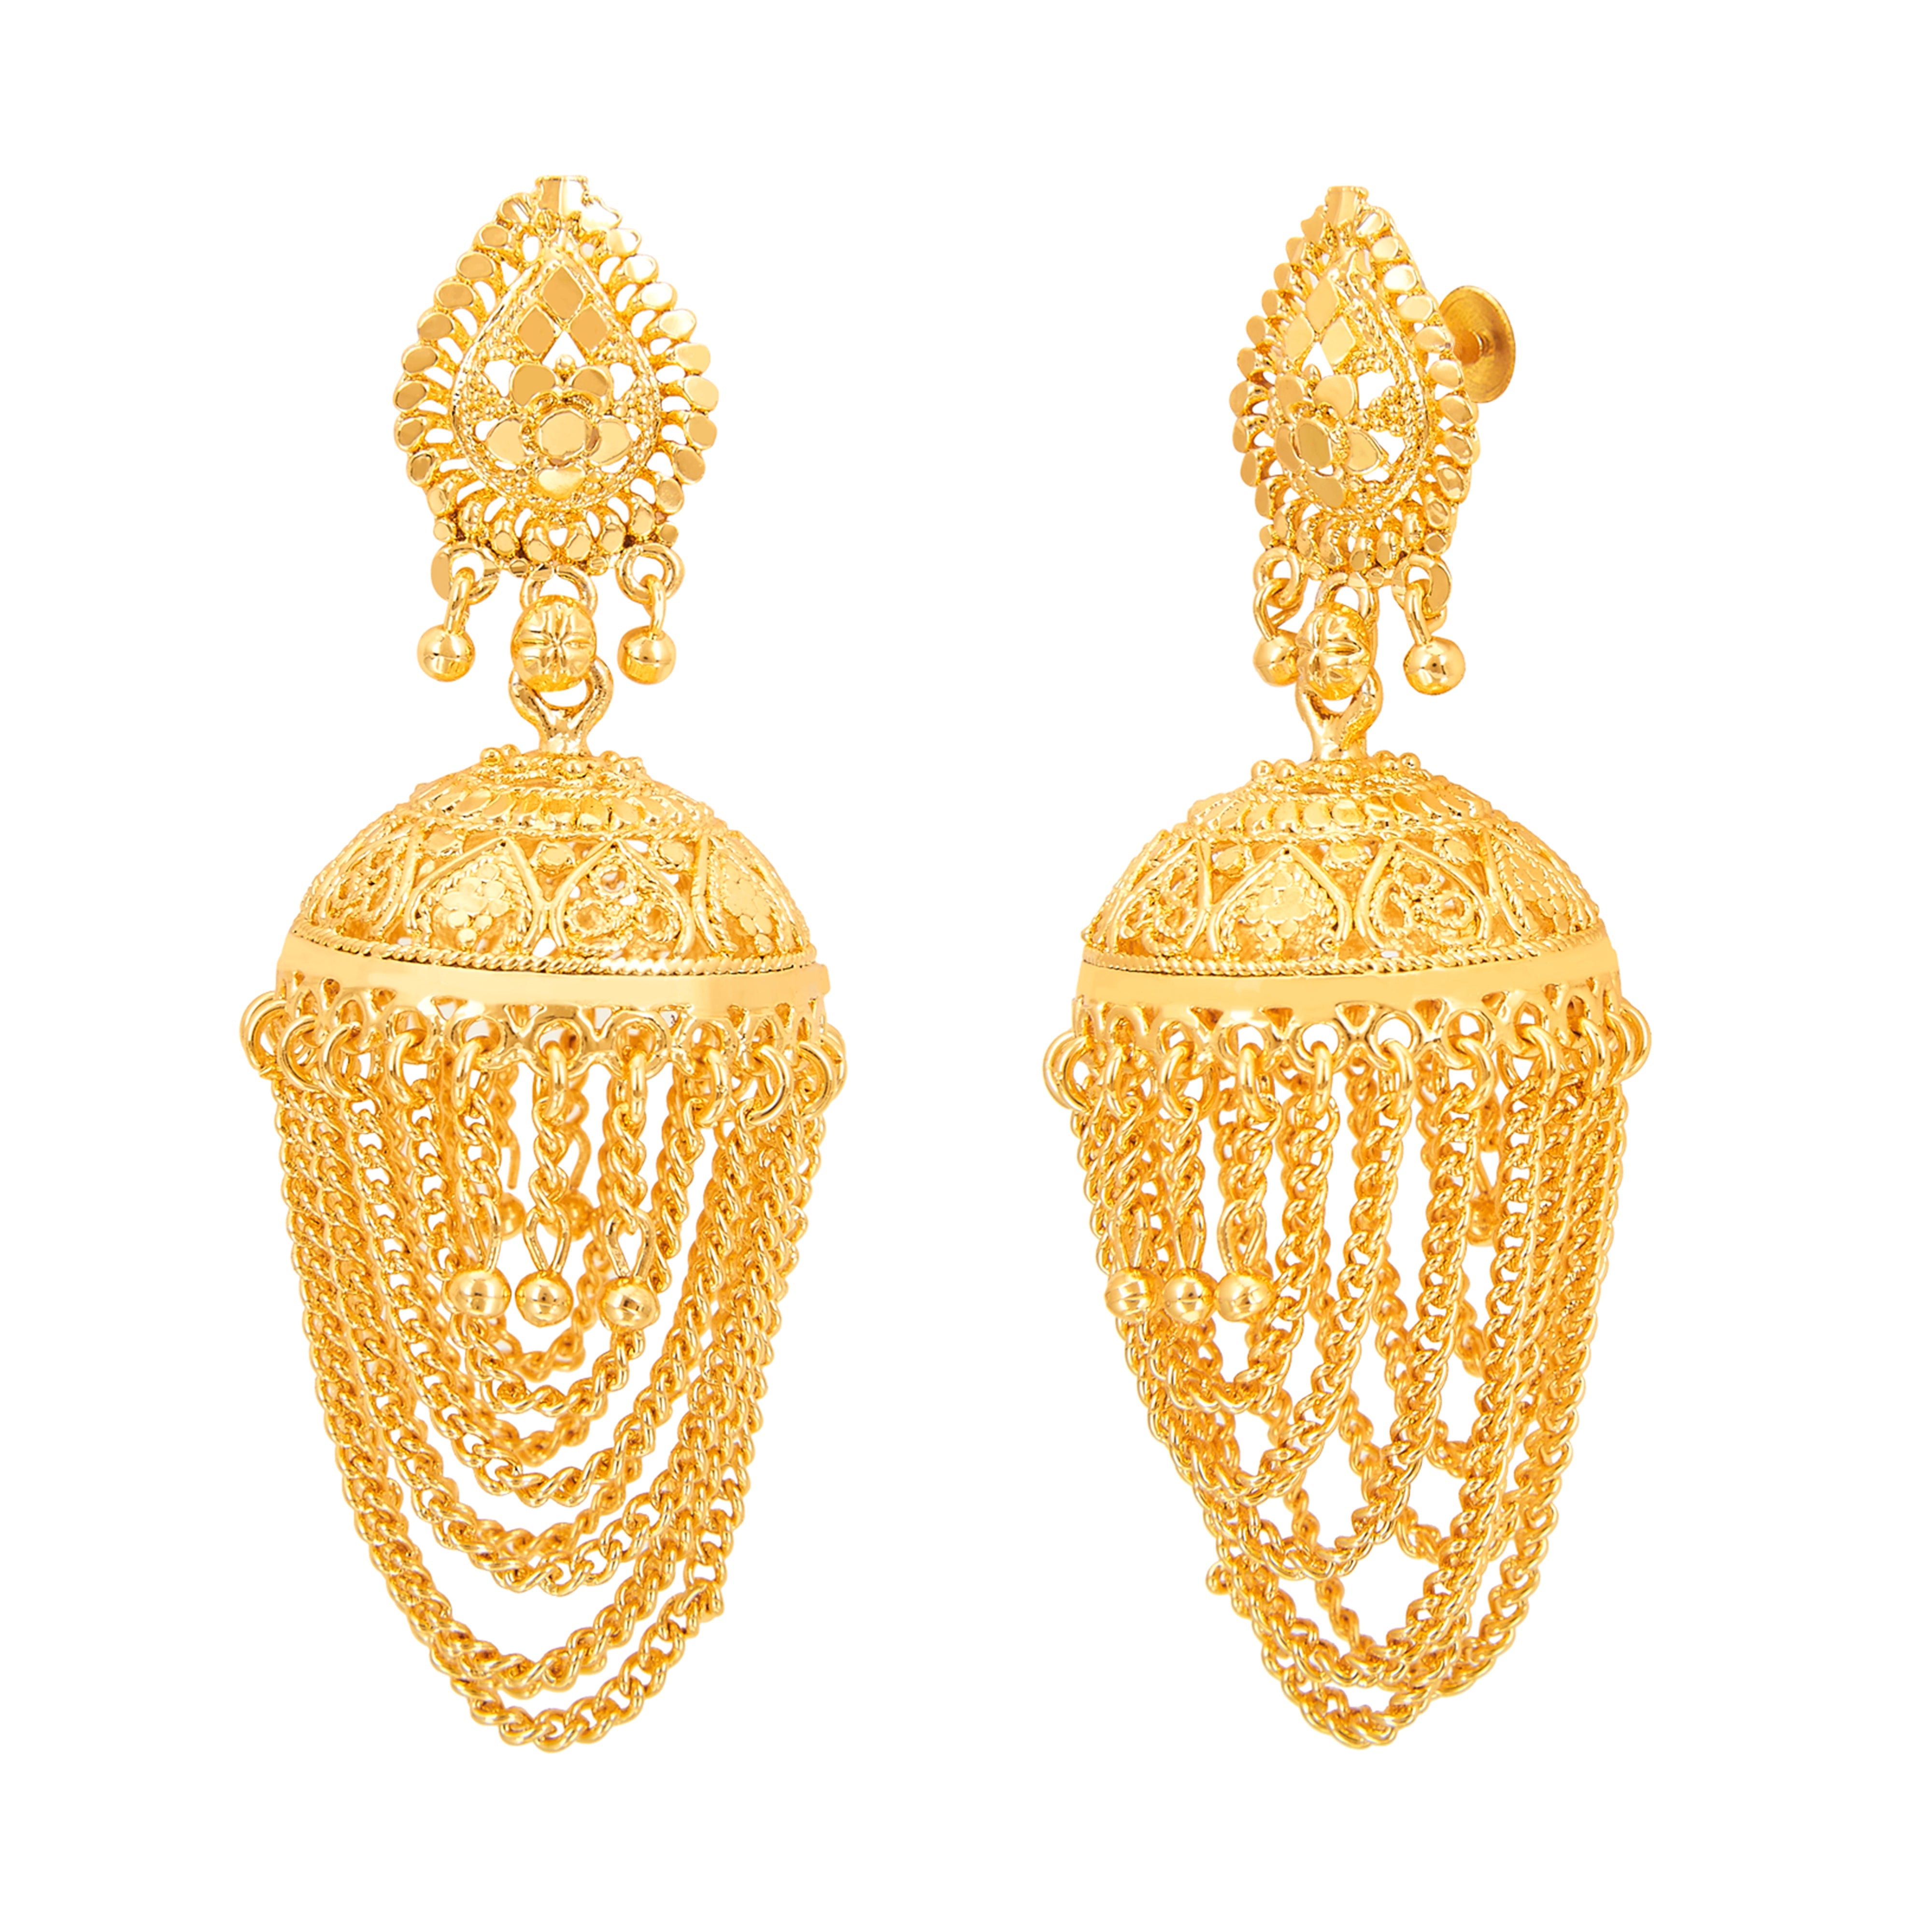 Buy Marriage Jhumka Design Gold Earrings Gold Plated Jewellery